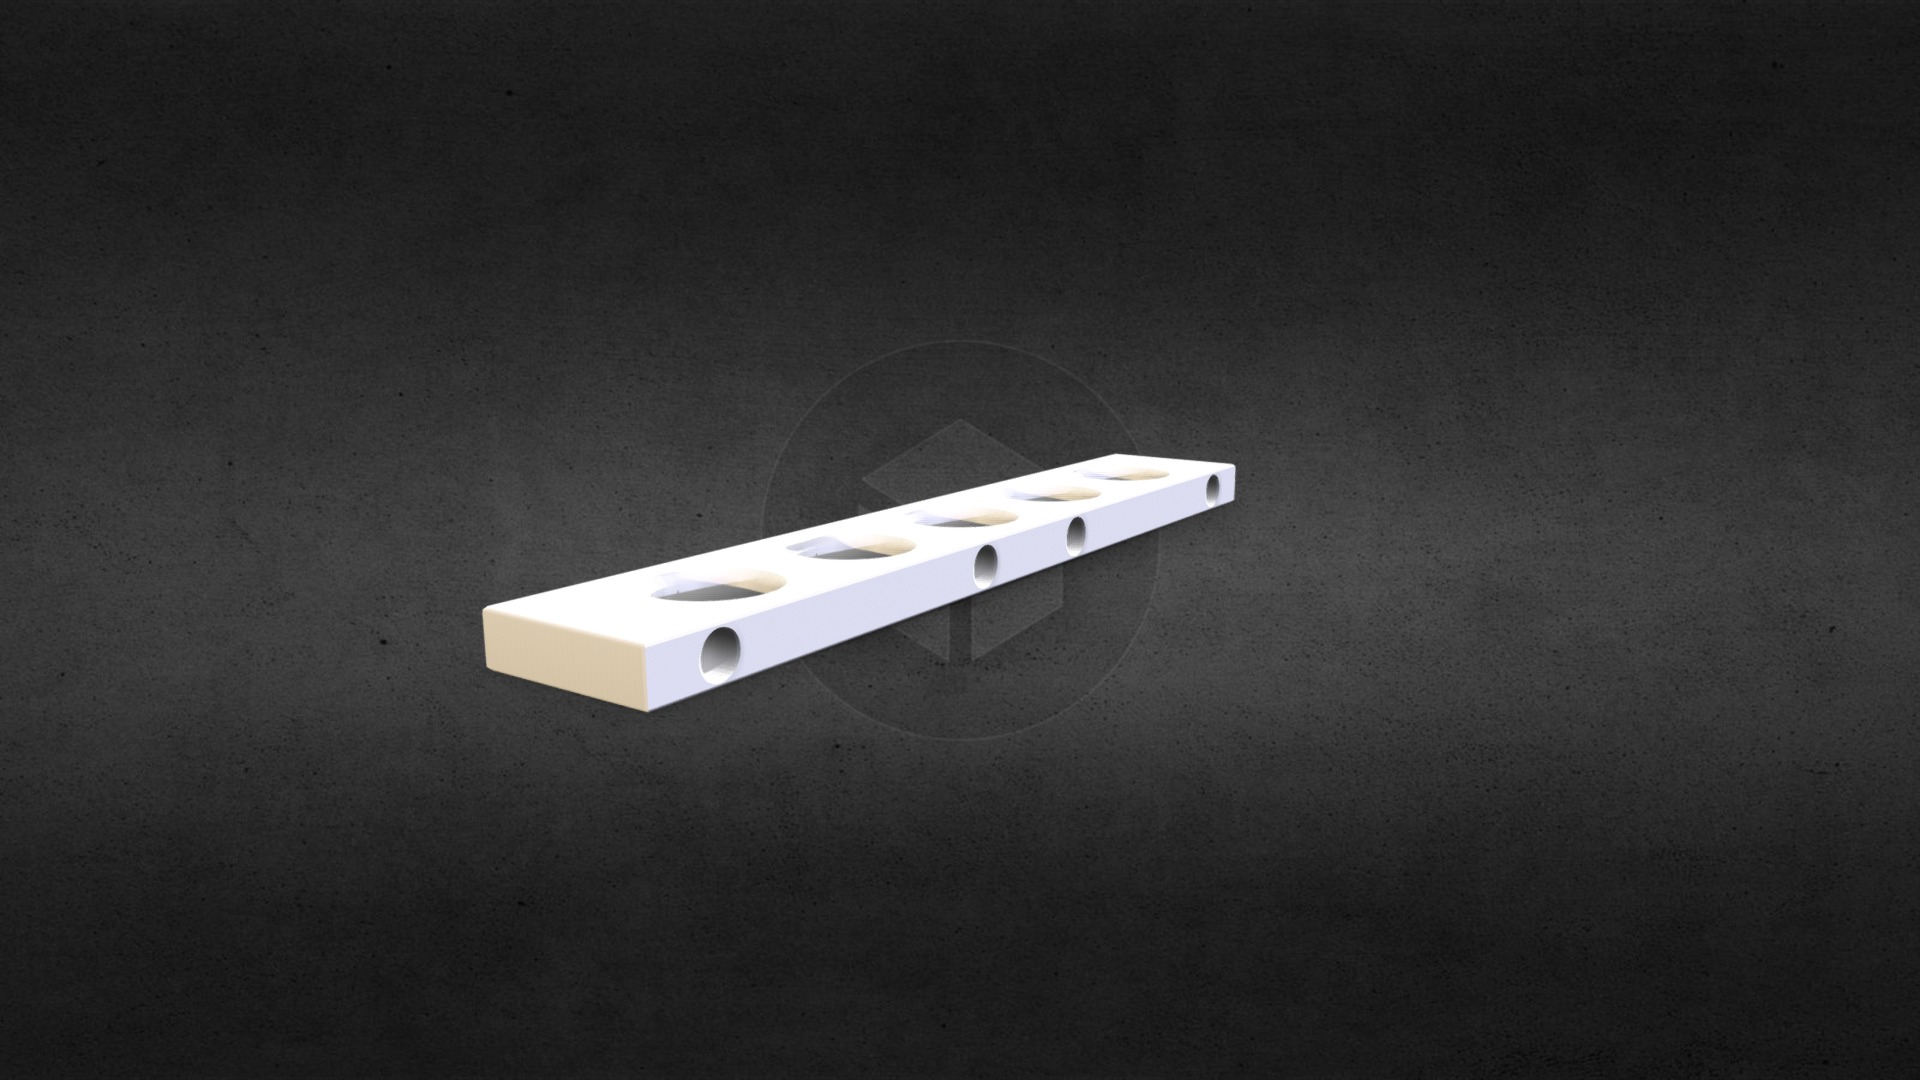 3D model m-board 1 - This is a 3D model of the m-board 1. The 3D model is about a white box with a wire.